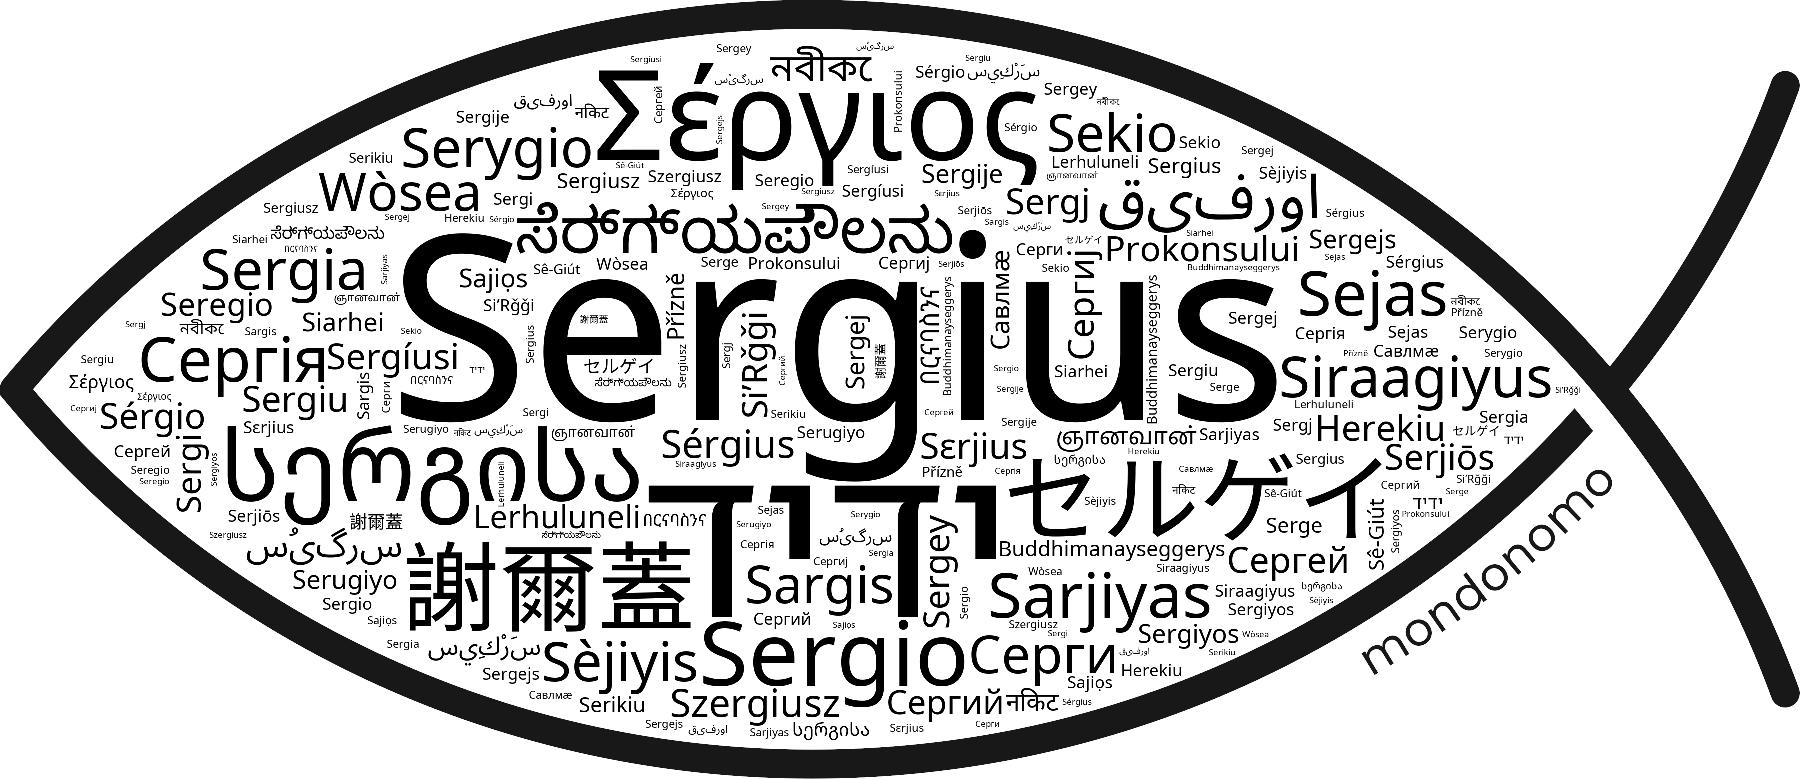 Name Sergius in the world's Bibles